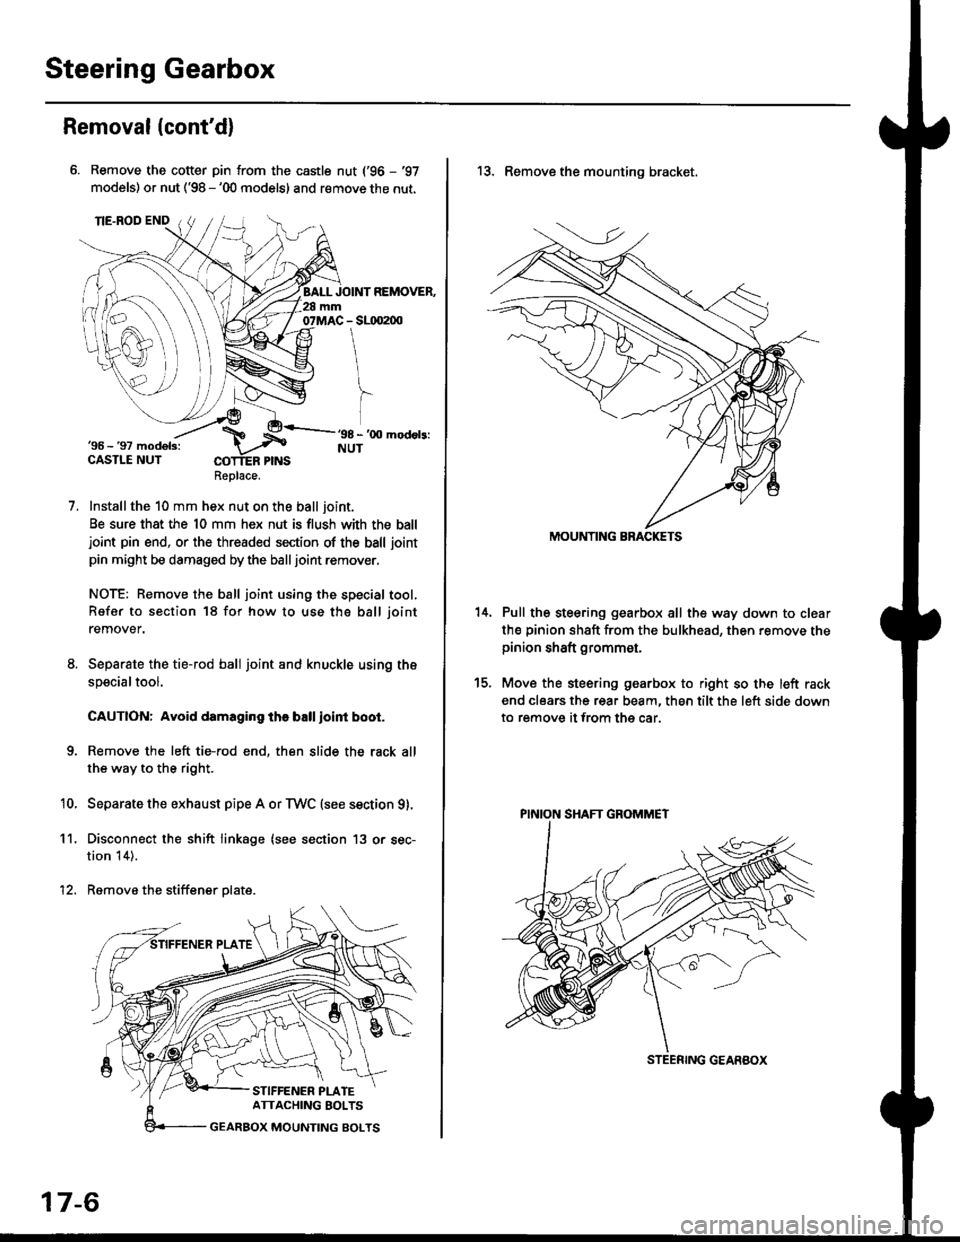 HONDA CIVIC 1996 6.G Service Manual Steering Gearbox
Removal(contd)
Remove the cotter pin from the castle nut (96 - 97
models) or nut (98 - 00 models) and remove the nut.
Installthe 10 mm hex nut on the ball joint.
Be sure that the